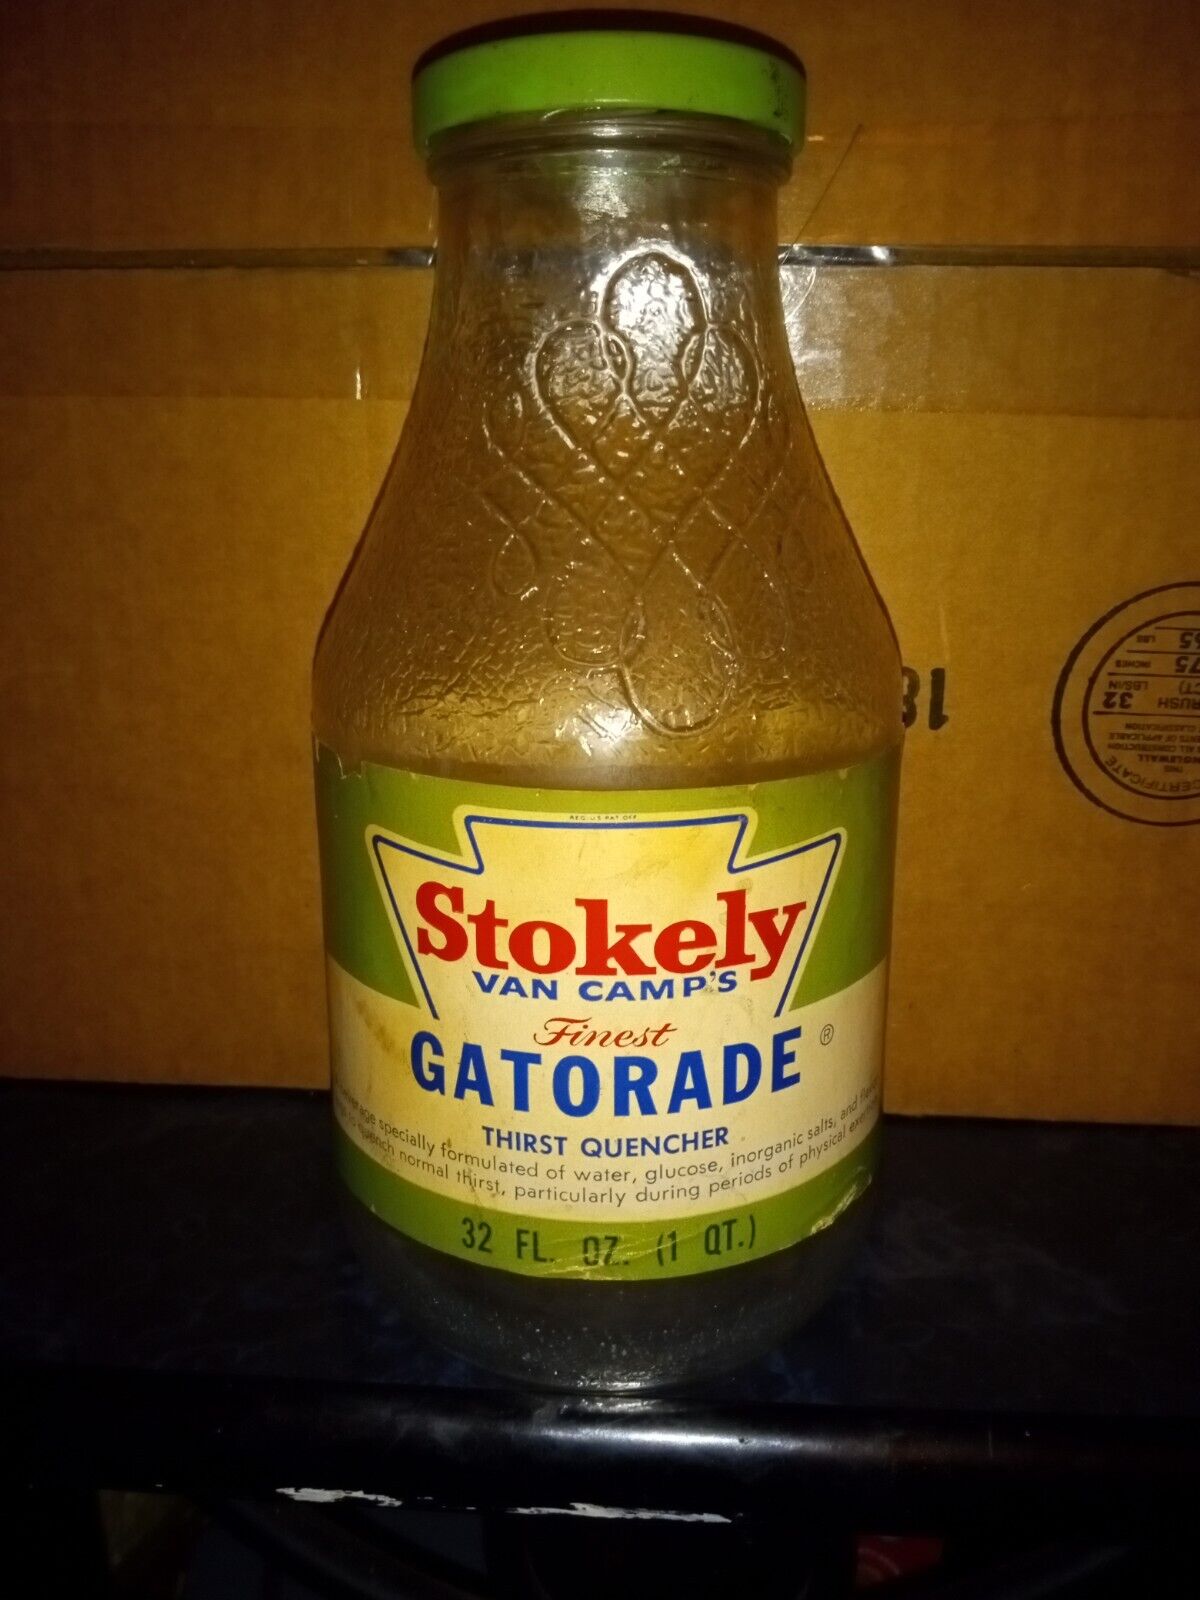 Vintage Stokely van camps first Ever Gatorade bottle from 1968. Holy grail 🏆